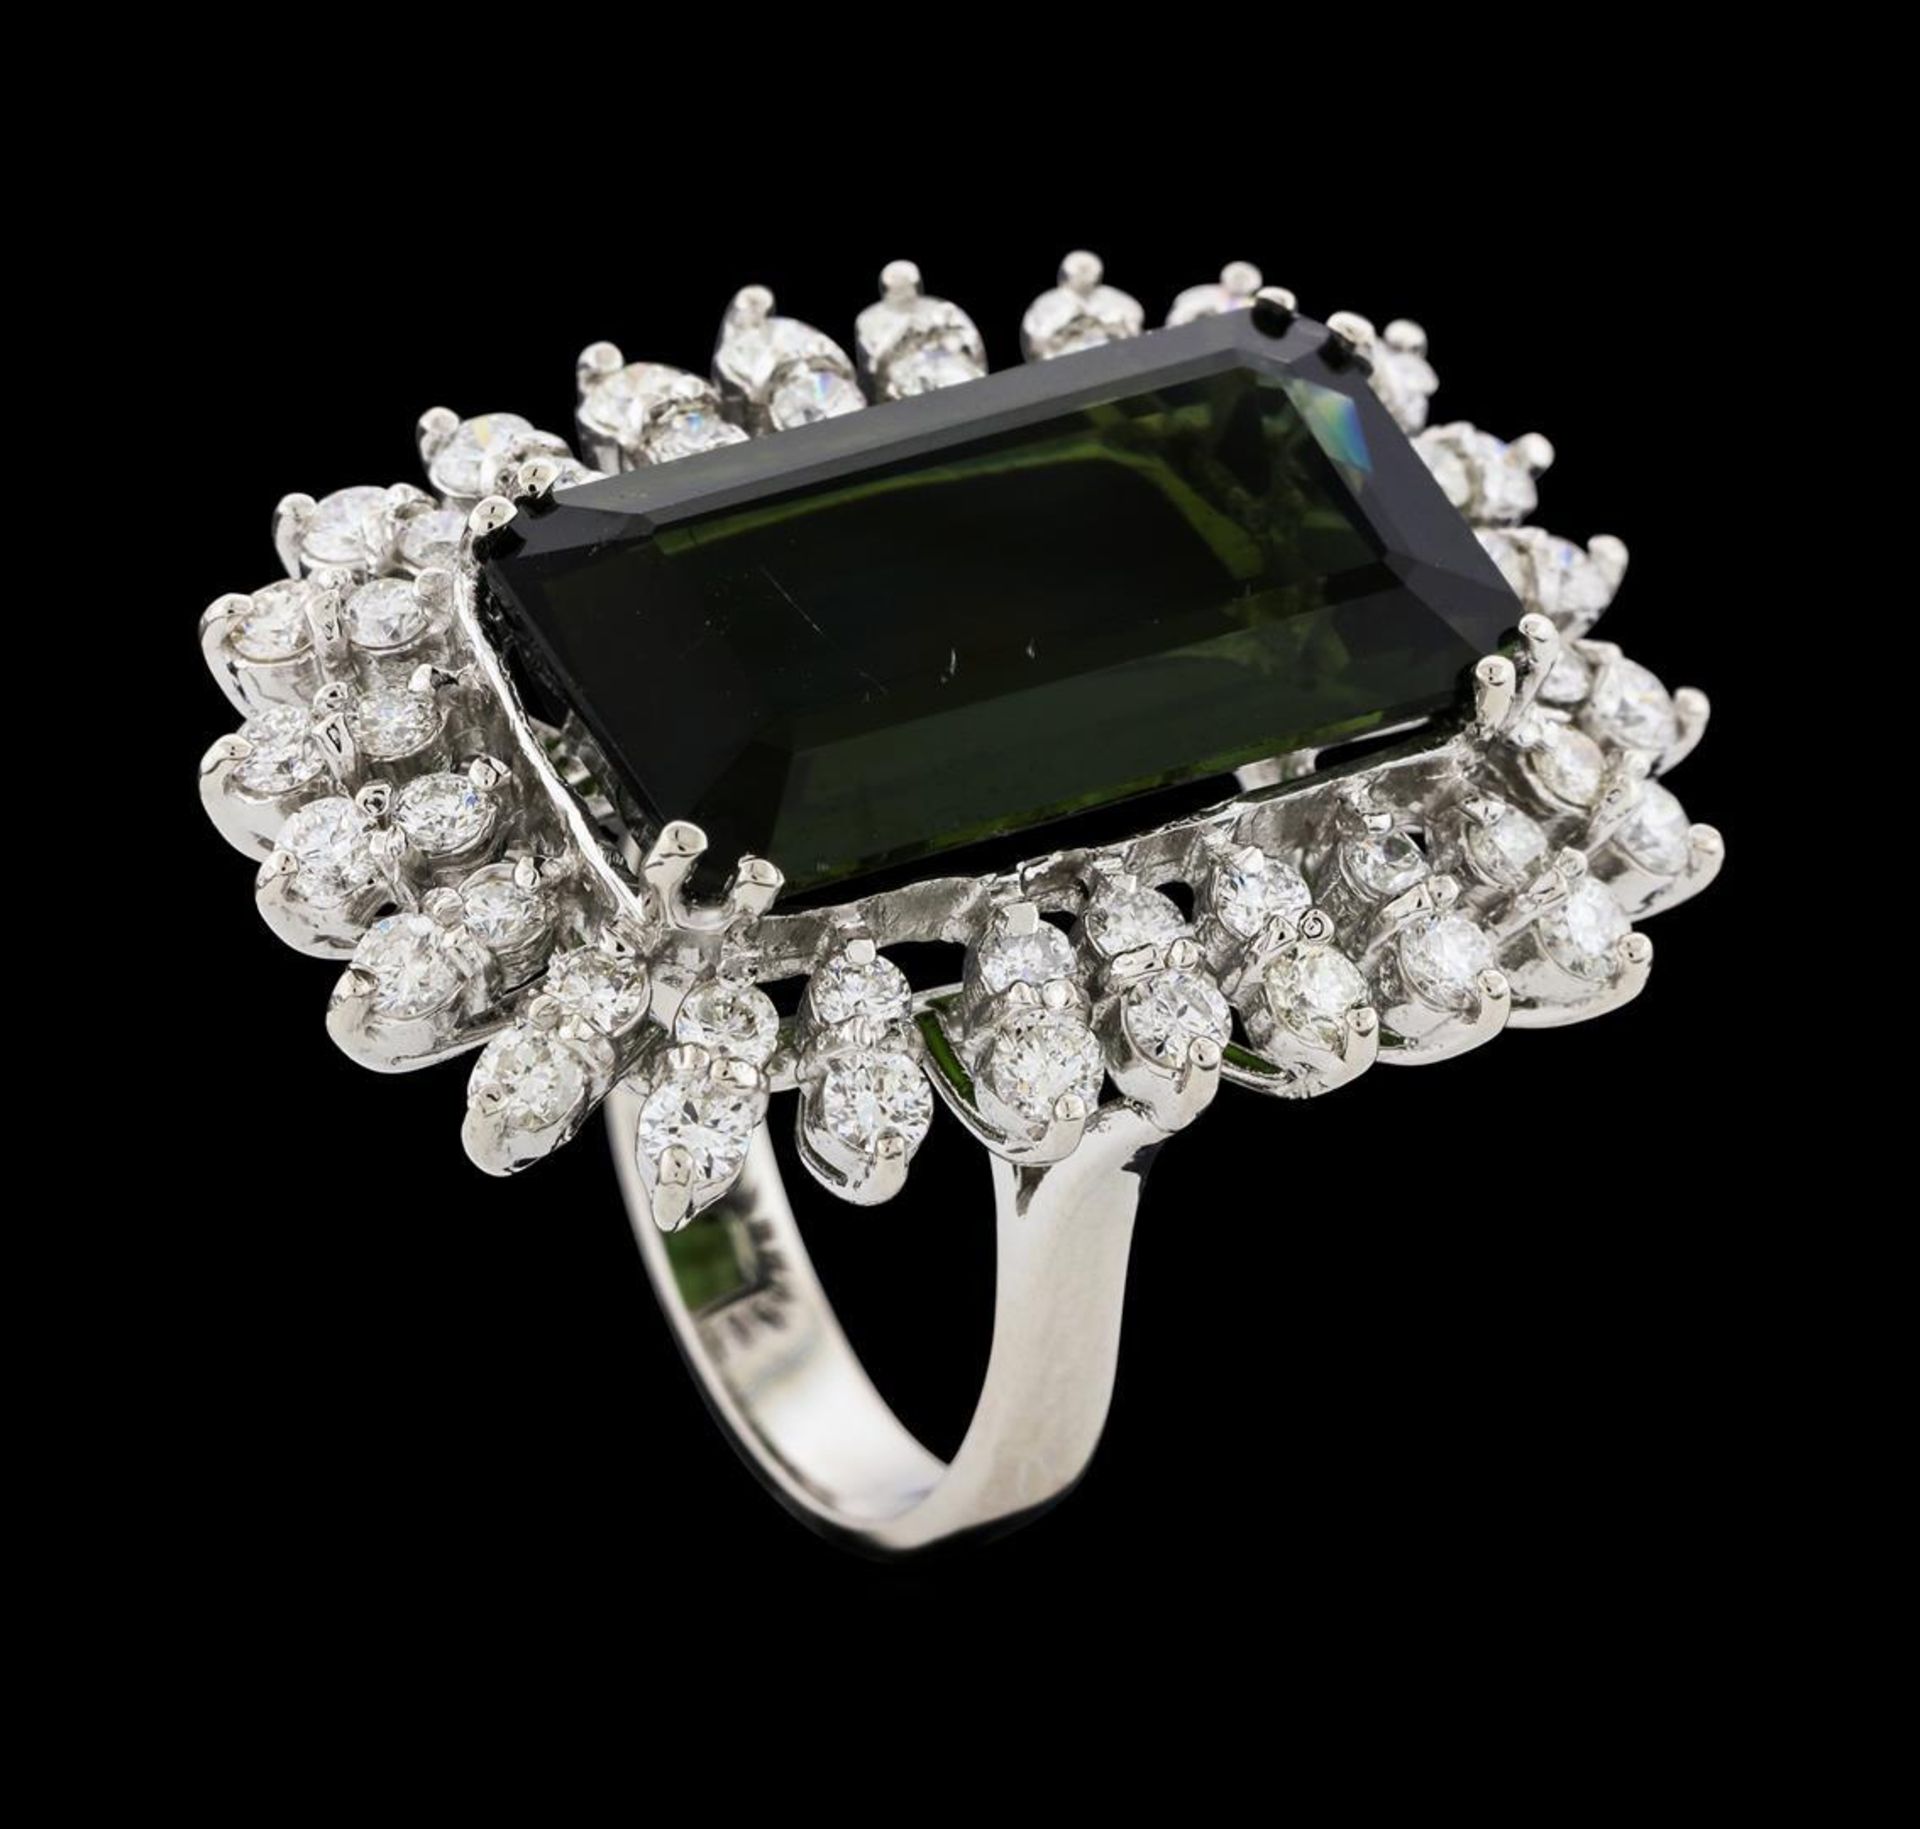 16.67 ctw Tourmaline and Diamond Ring - 14KT White Gold - Image 4 of 5